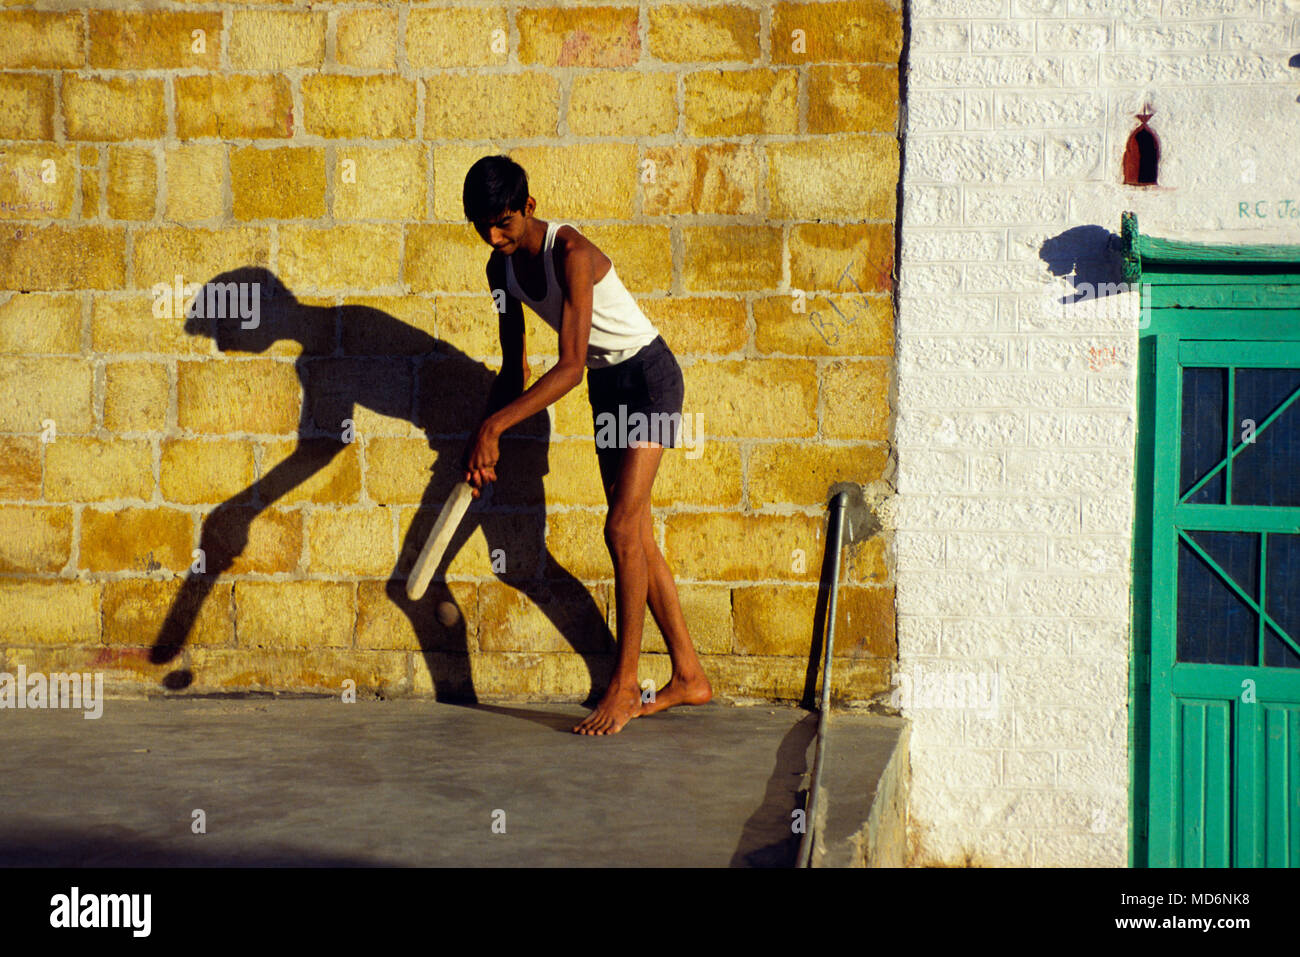 Jaisalmer, India; boy playing street cricket. By far the most popular sport in India, cricket is a multi-million dollar industry. Stock Photo